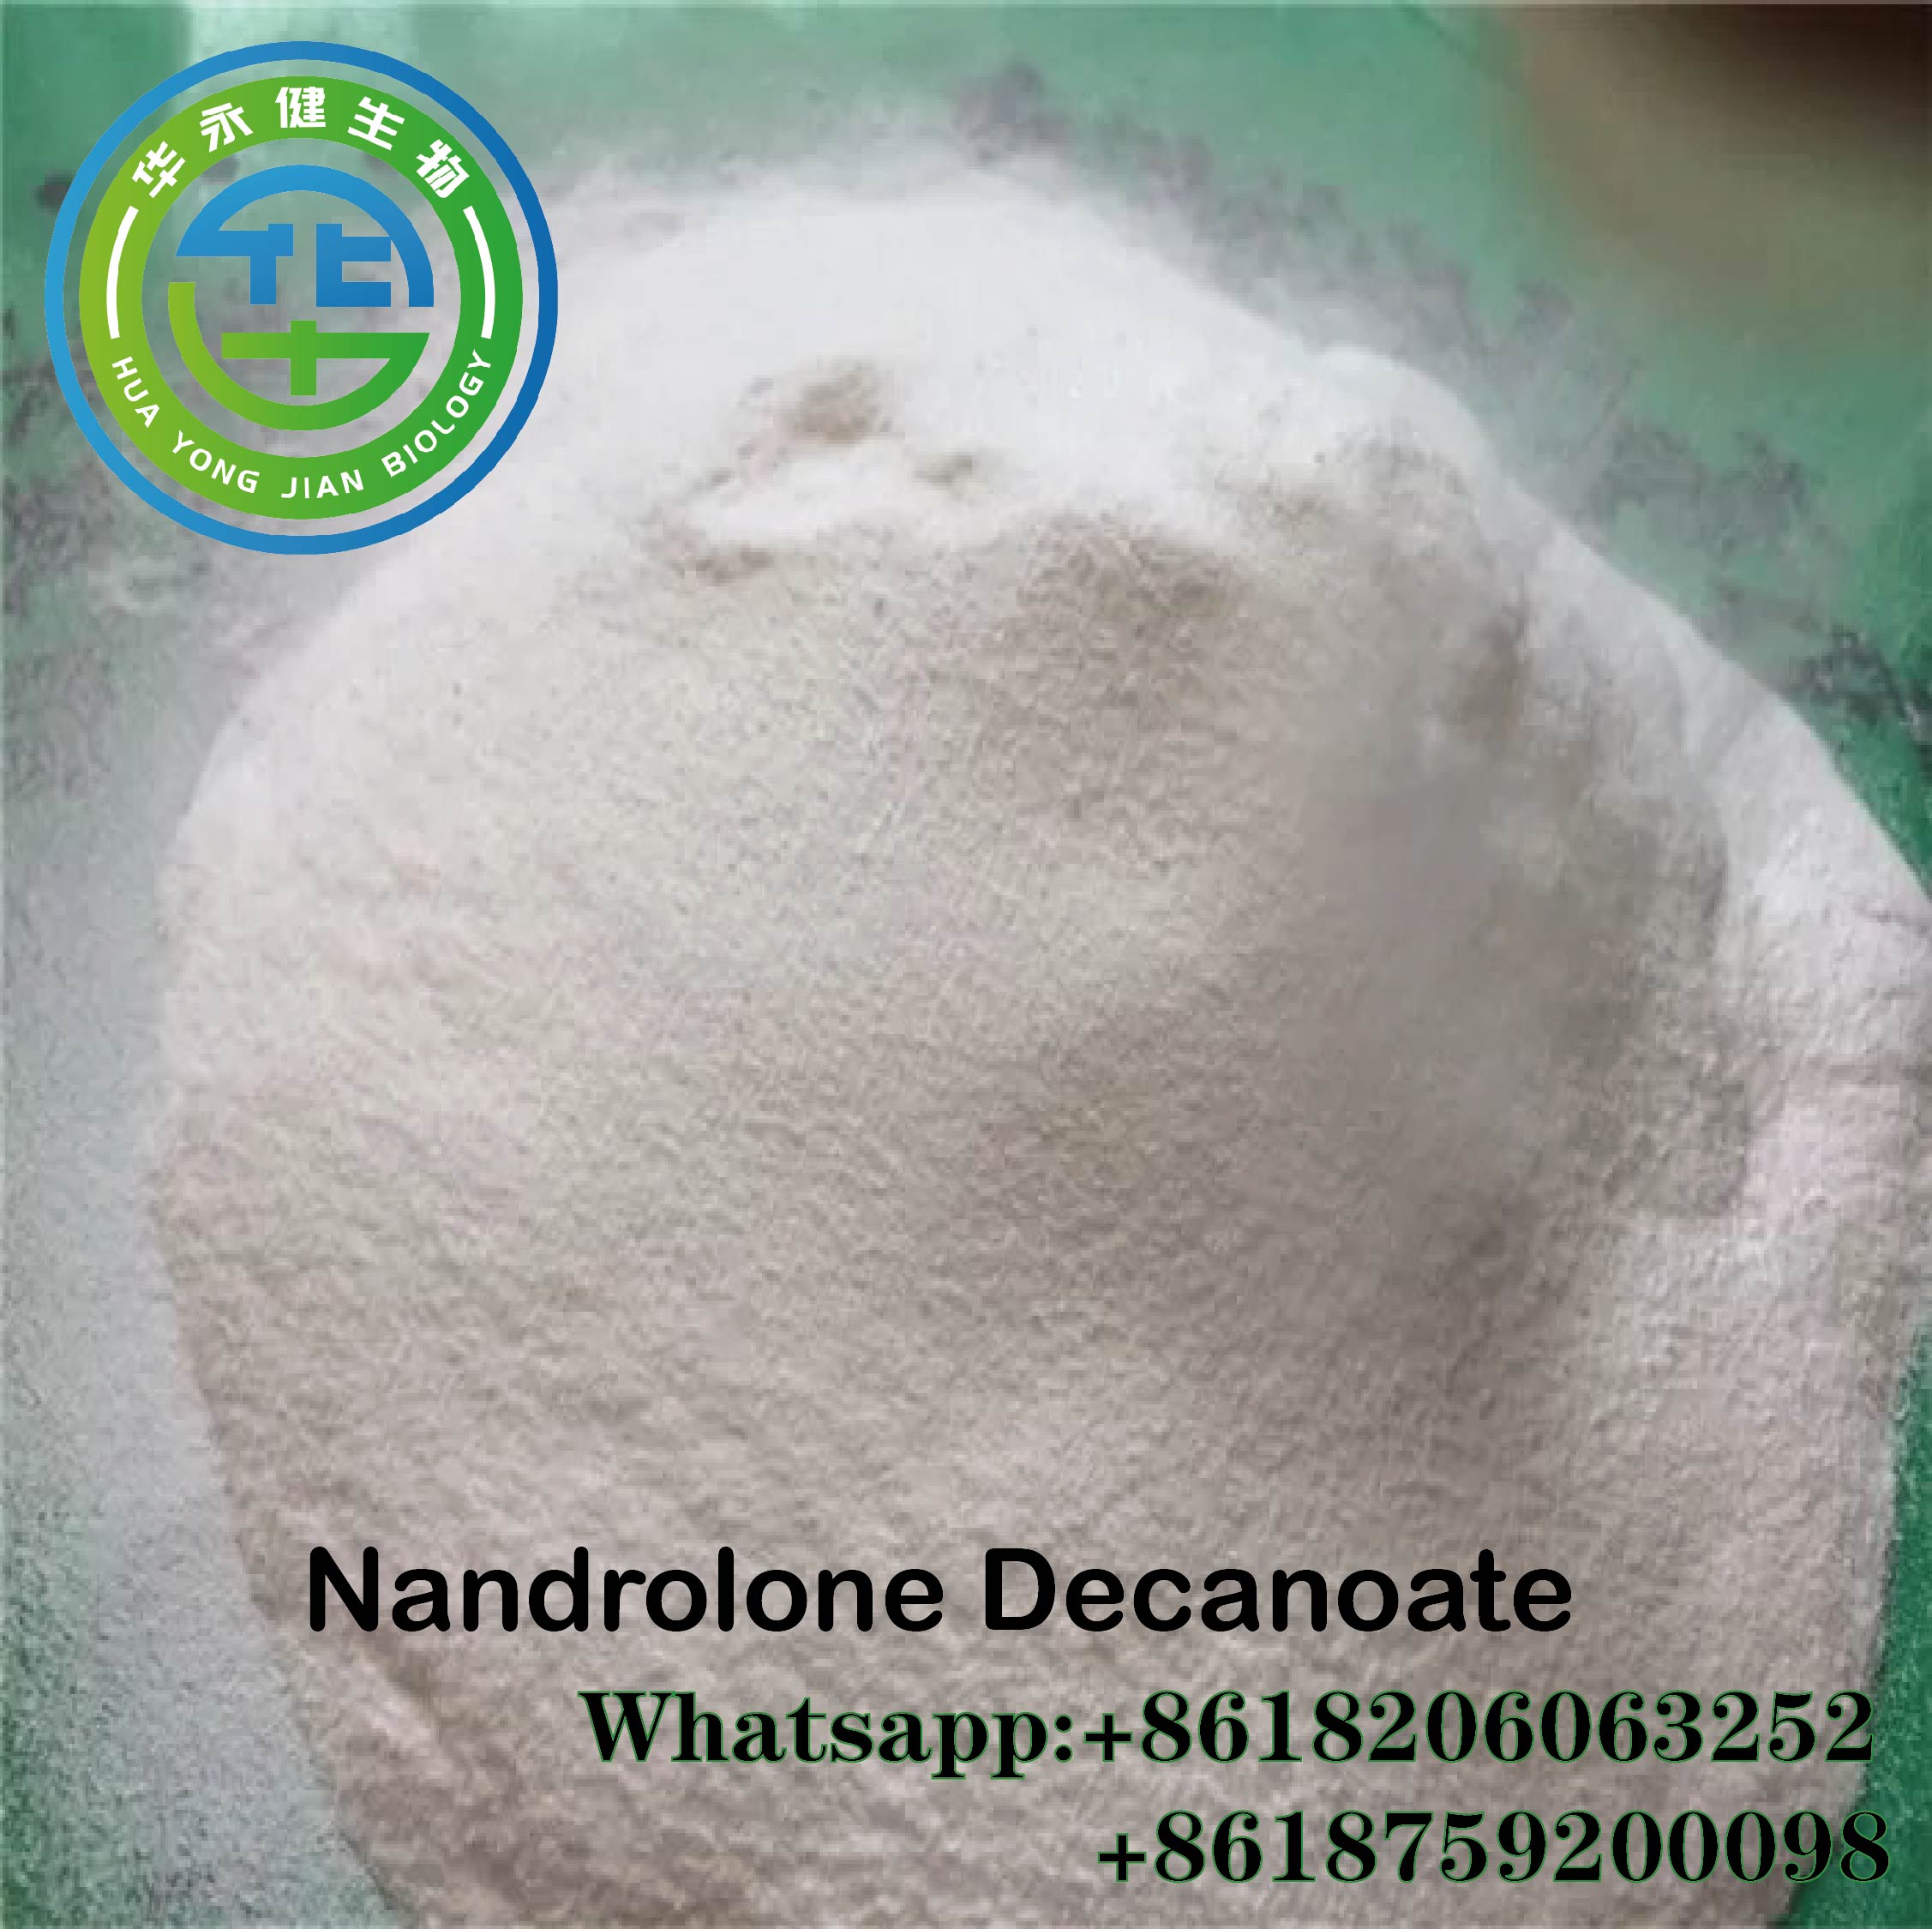 Nandrolone Decanoate White Raw Powder Deca300 Anabolic Mestanolone Para sa Muscle Building CasNO.360-70-3/DECA Featured Image